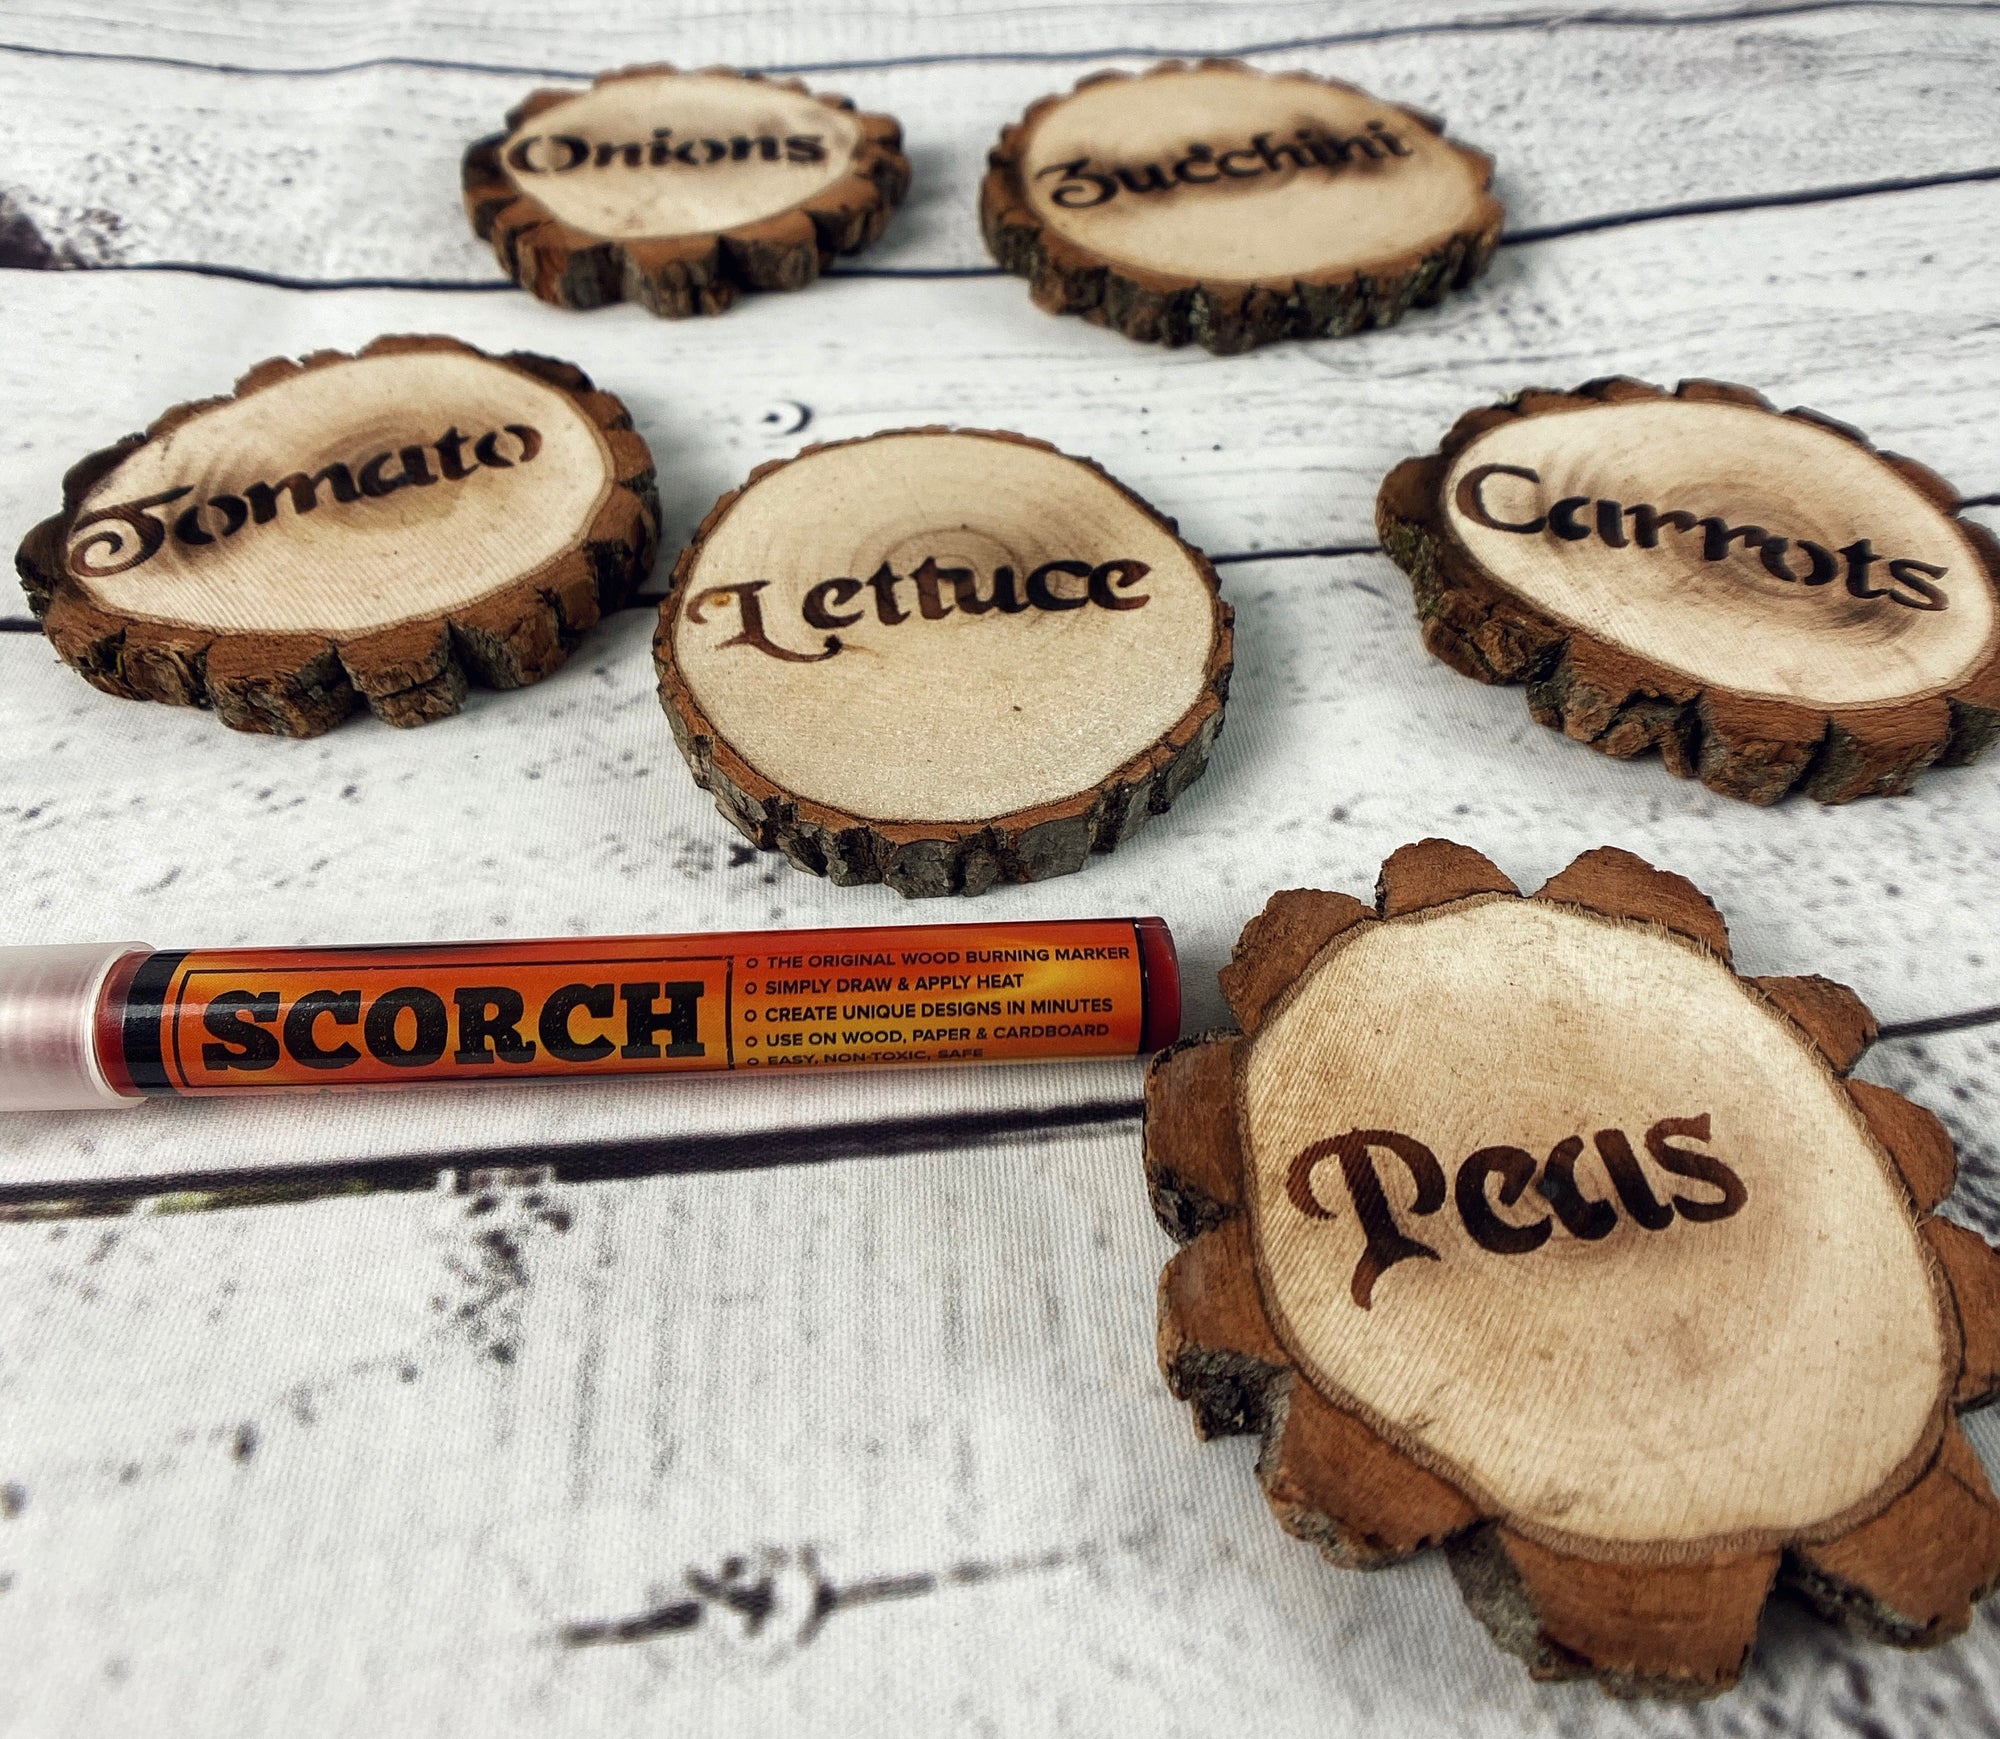 Wood Burning 101, Pyrography Letters, Signs For The Garden 